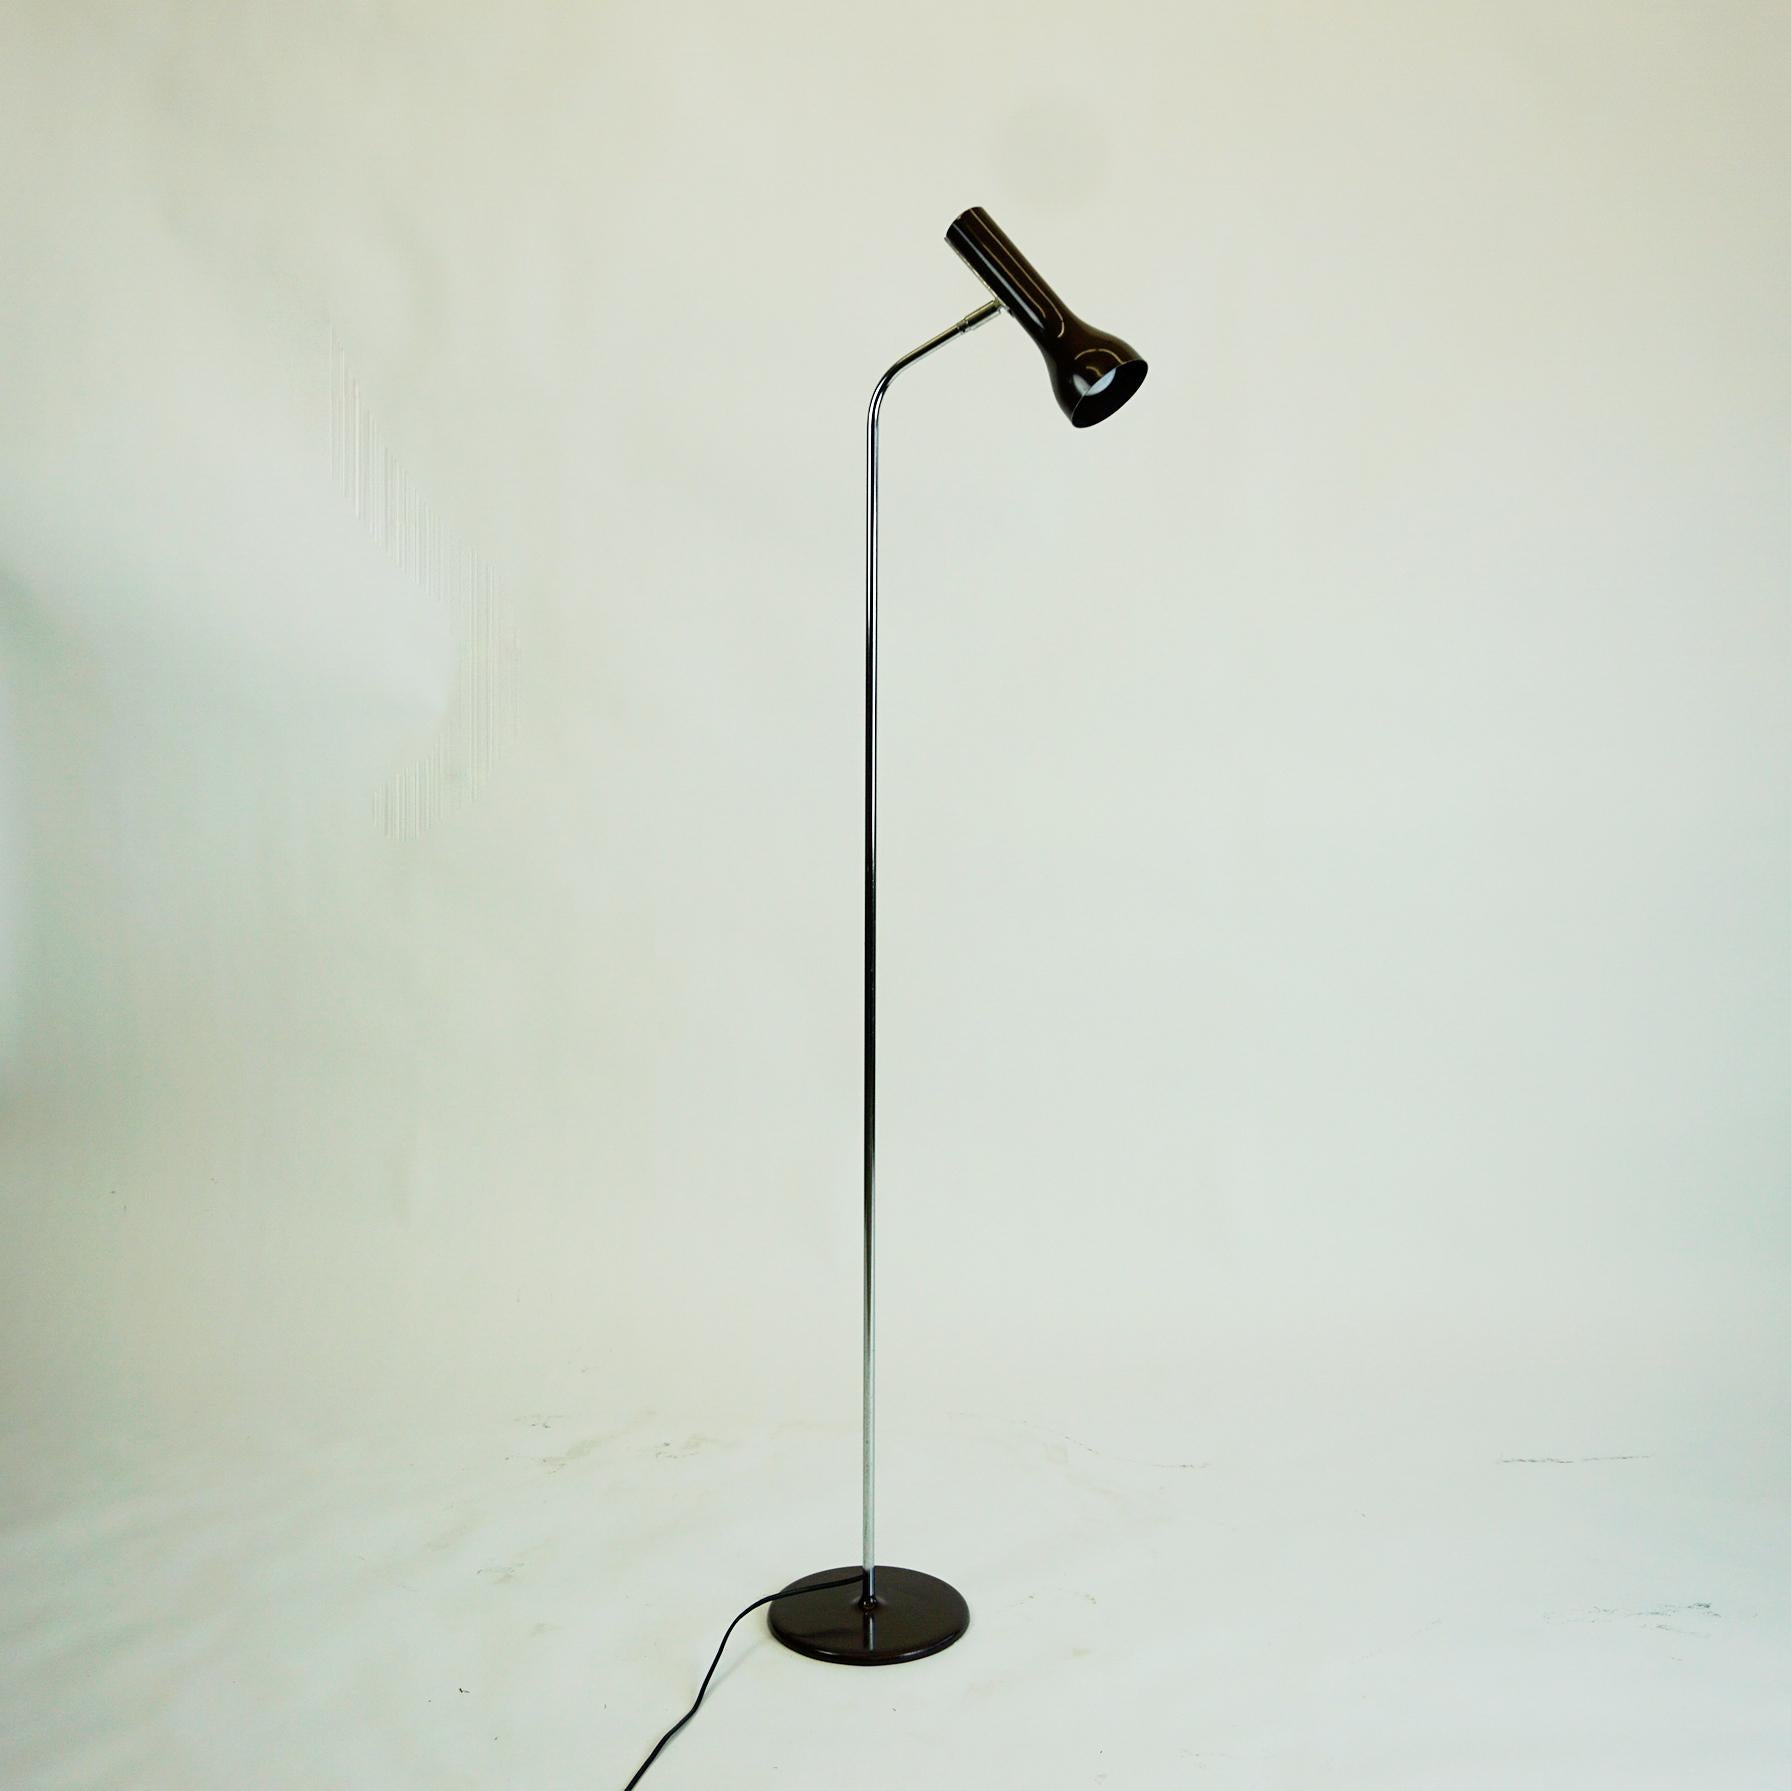 This charming dark chocolate brown modernist spot floor lamp with adjustable and pivoting shade has been designed by LAD Team for Swiss lamps International, Zürich in 1966.
It is in very good original condition with only a few slight signs of use.